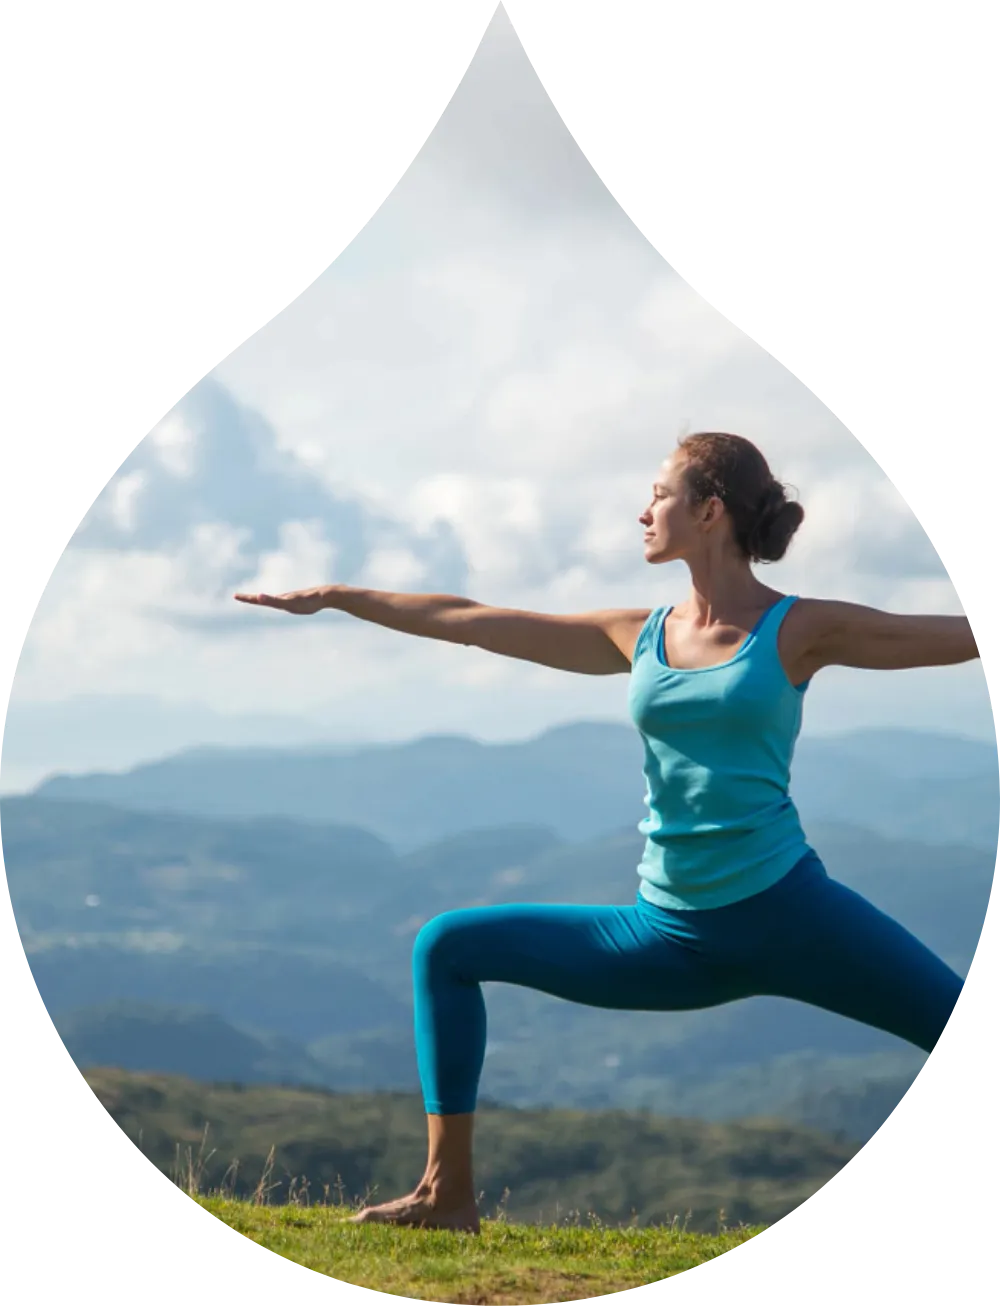 Acquia droplet graphic with digital key features image concept lifestyle woman yoga pose on hillside